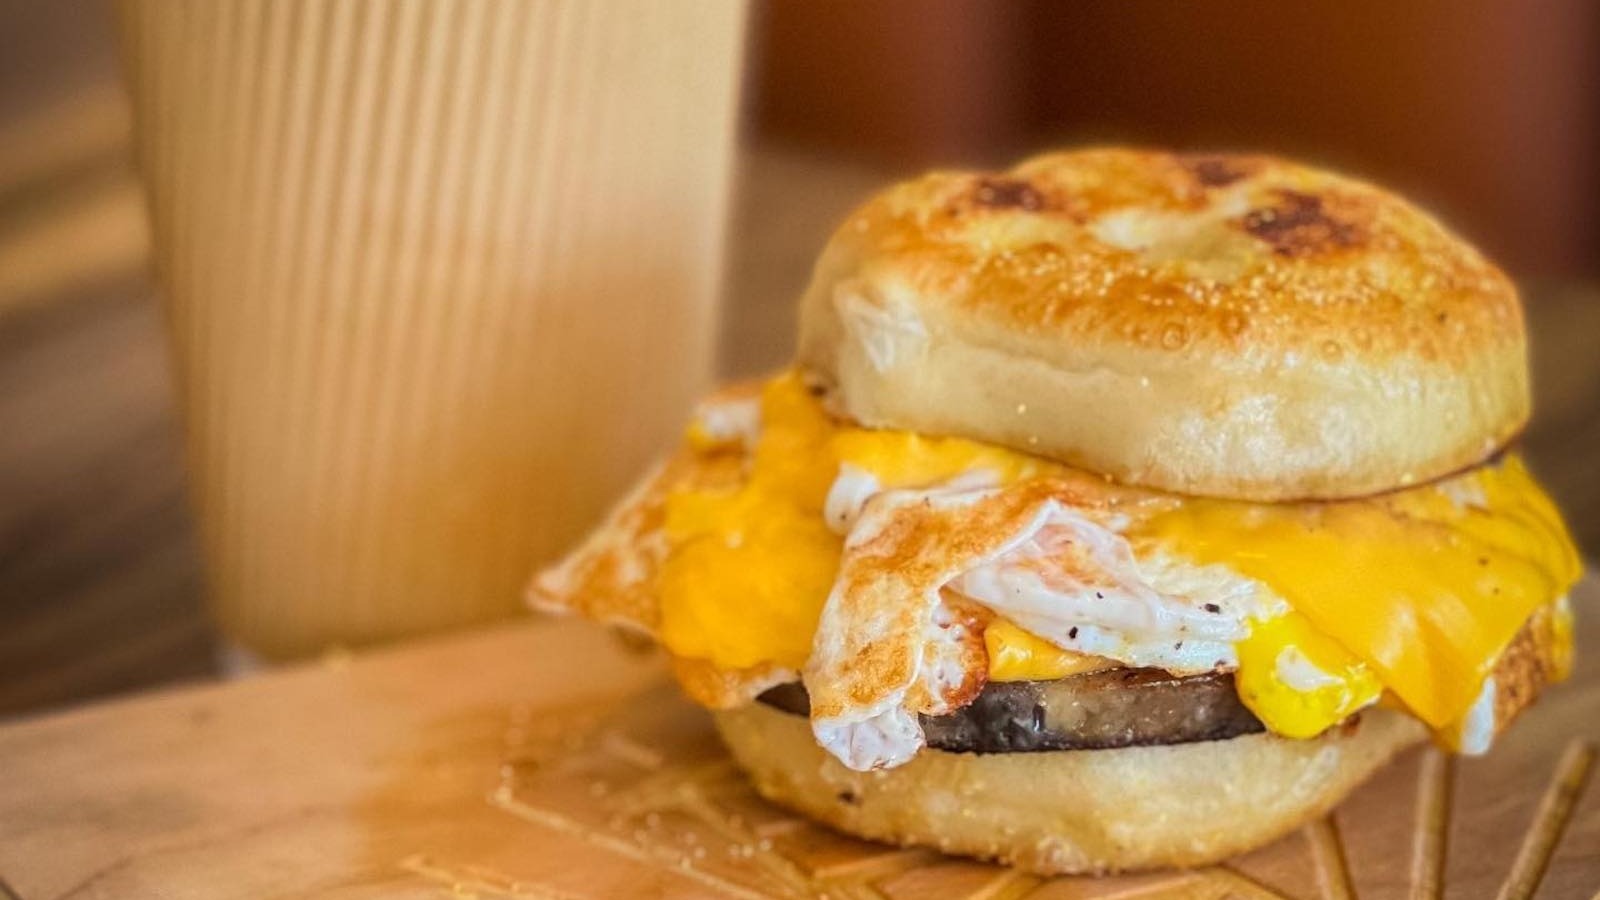 https://www.tastingtable.com/img/gallery/where-to-find-the-20-best-breakfast-sandwiches-in-america/l-intro-1658786134.jpg